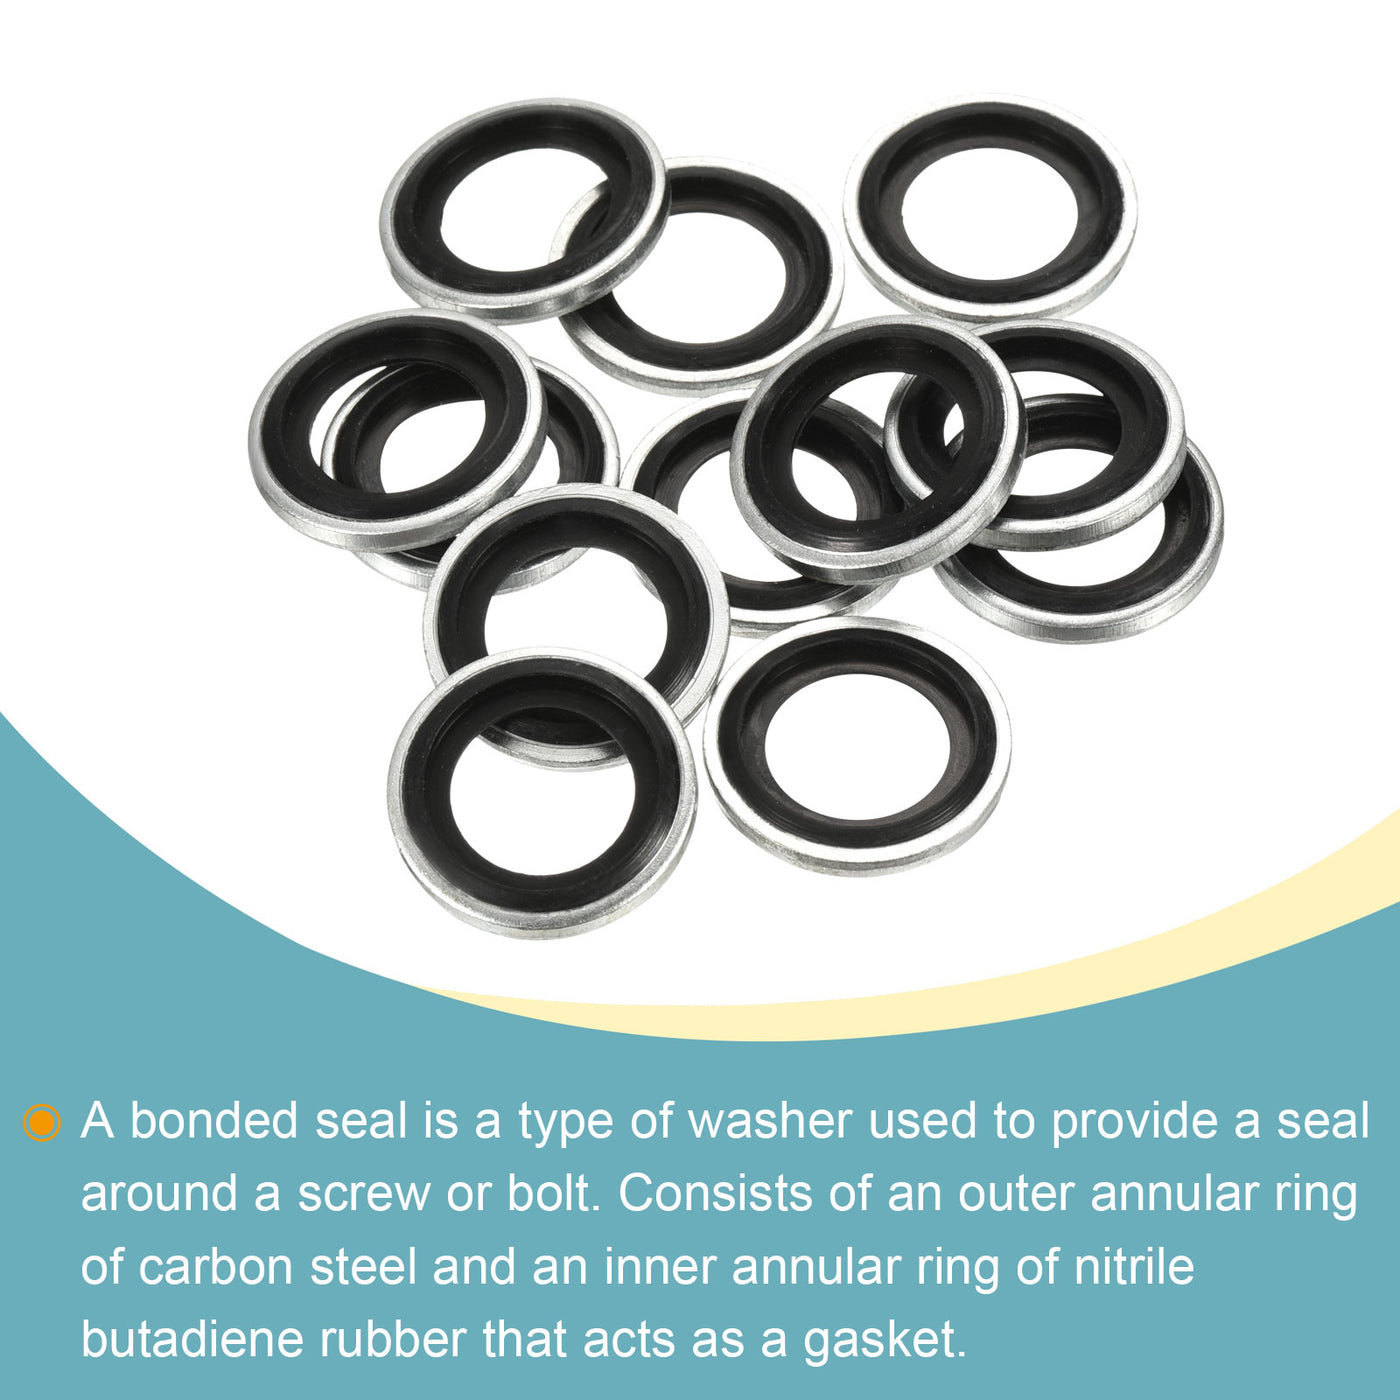 Harfington Bonded Sealing Washers M14 19.9x14.7x2mm Carbon Steel Nitrile Rubber Gasket, Pack of 12